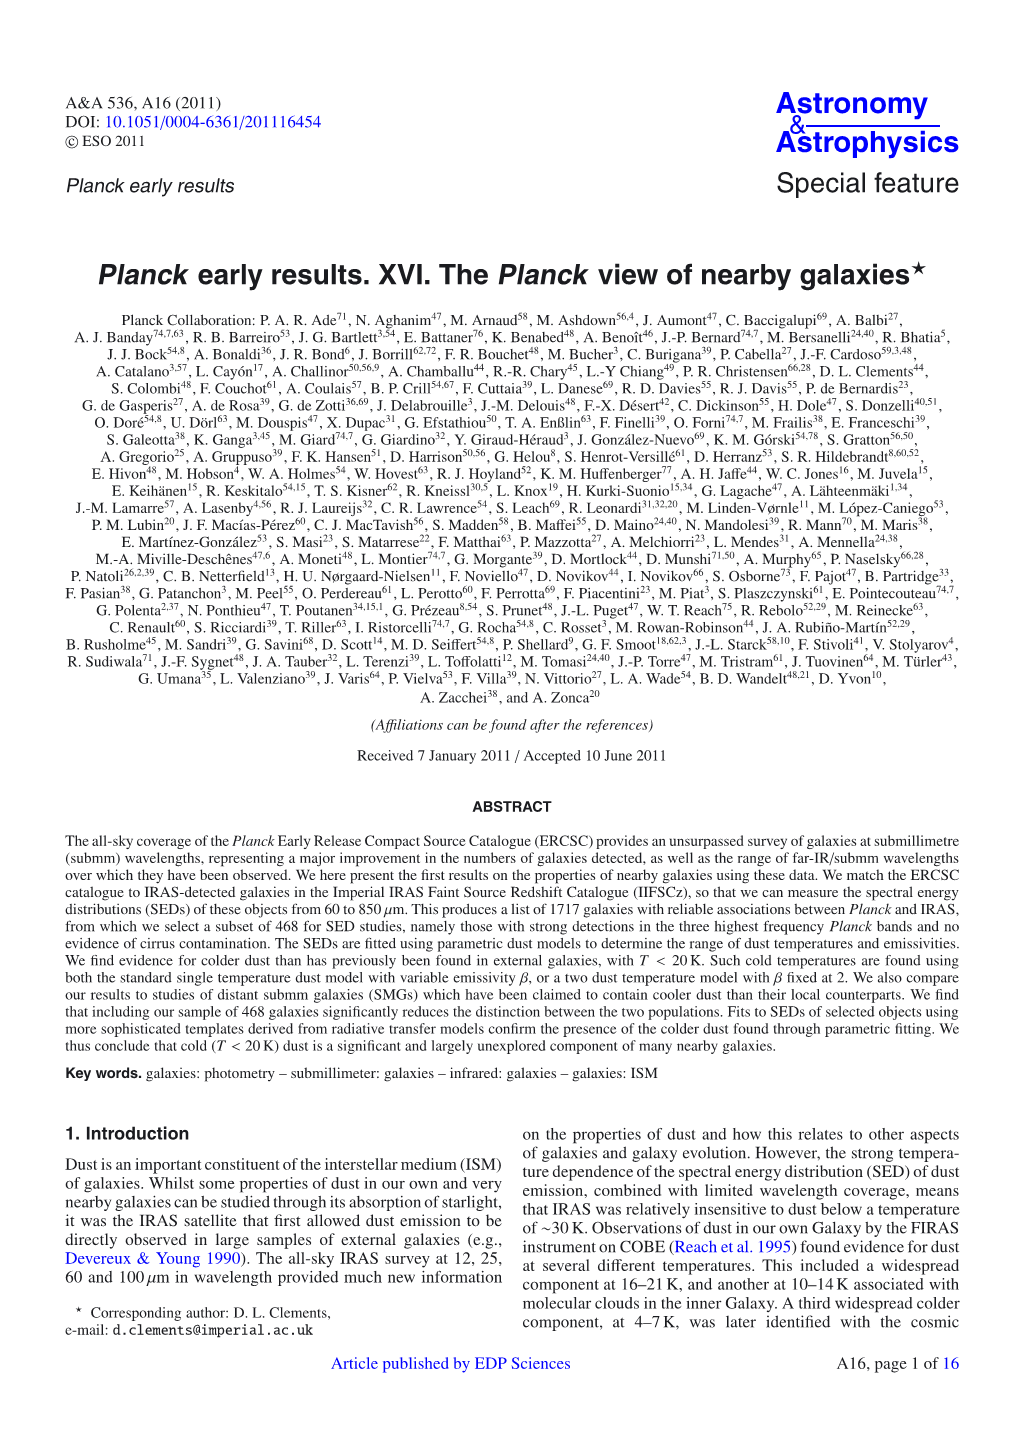 Planck Early Results. XVI. the Planck View of Nearby Galaxies⋆